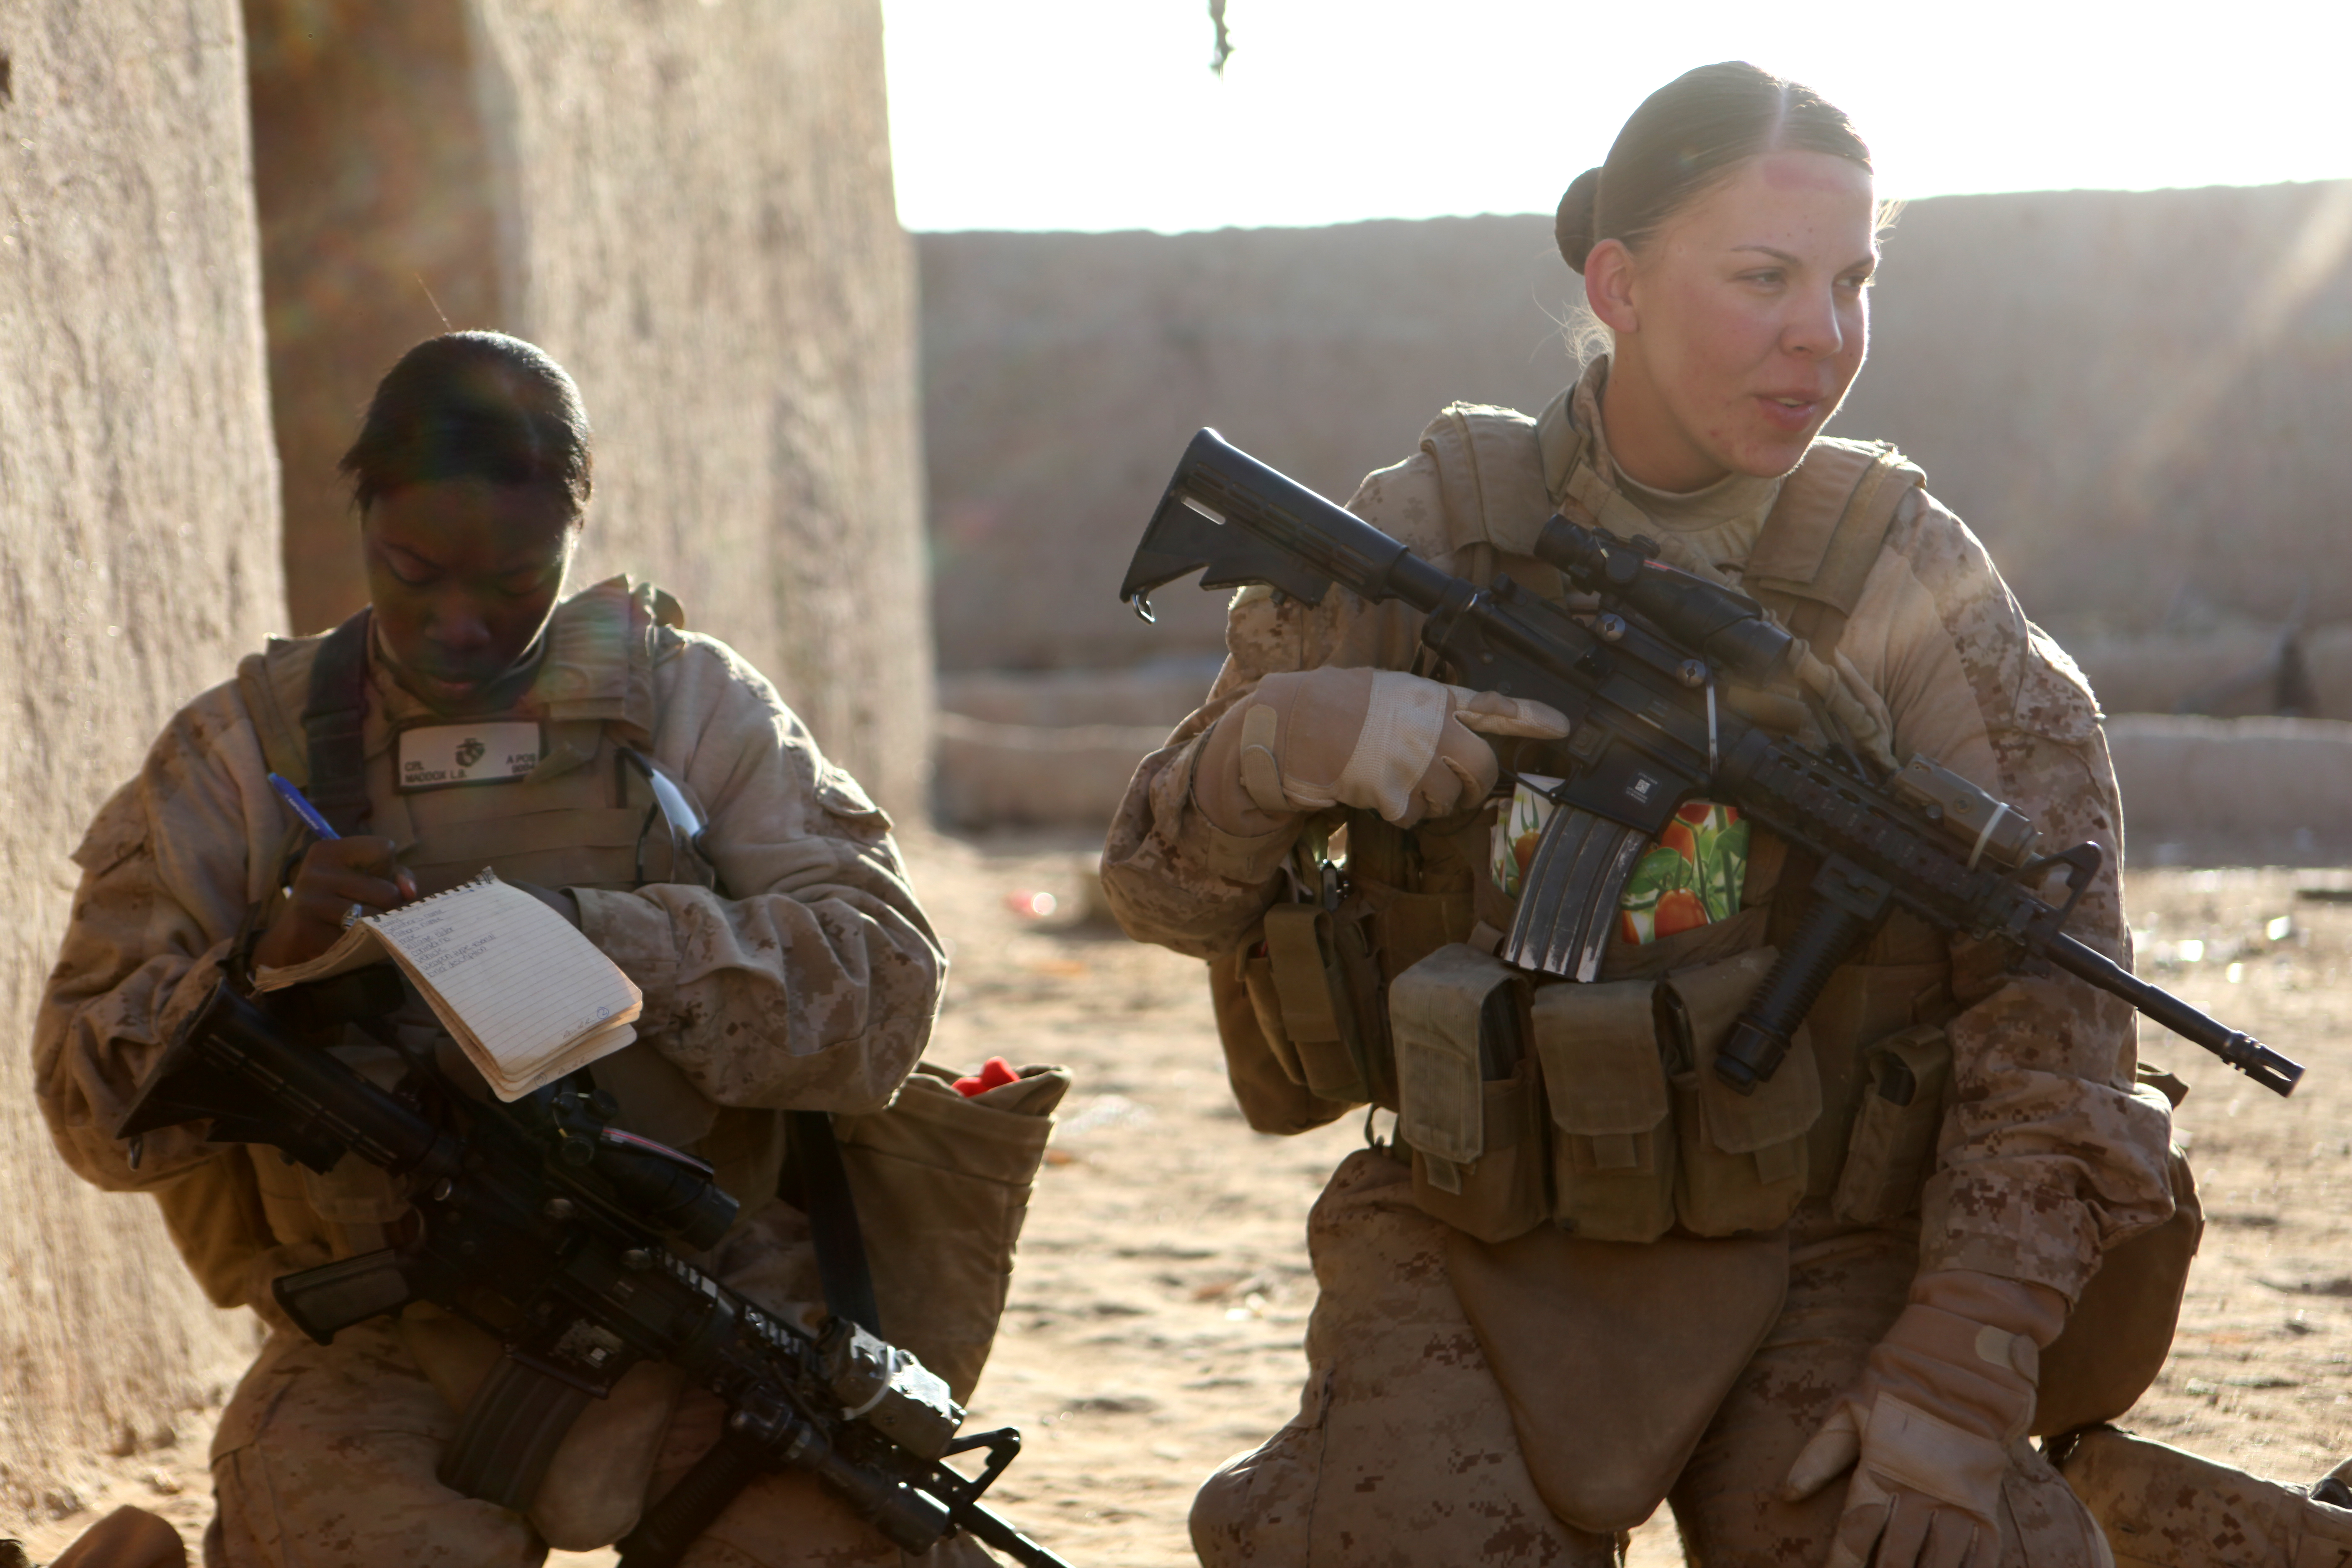 The intertwining legacy of women in the military and the Forever War